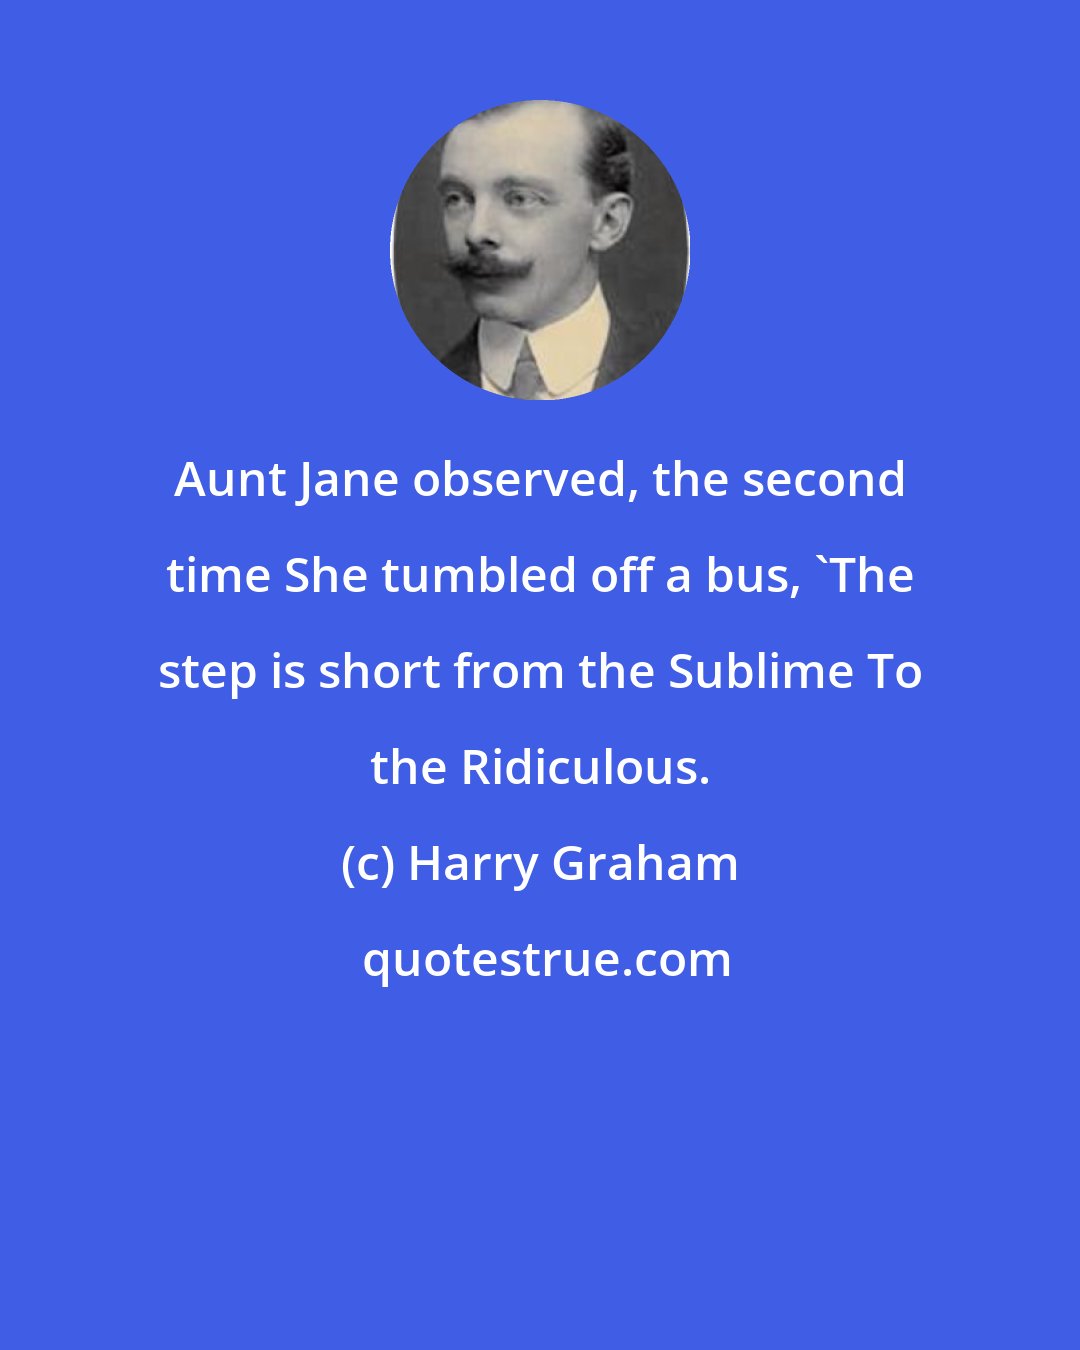 Harry Graham: Aunt Jane observed, the second time She tumbled off a bus, 'The step is short from the Sublime To the Ridiculous.